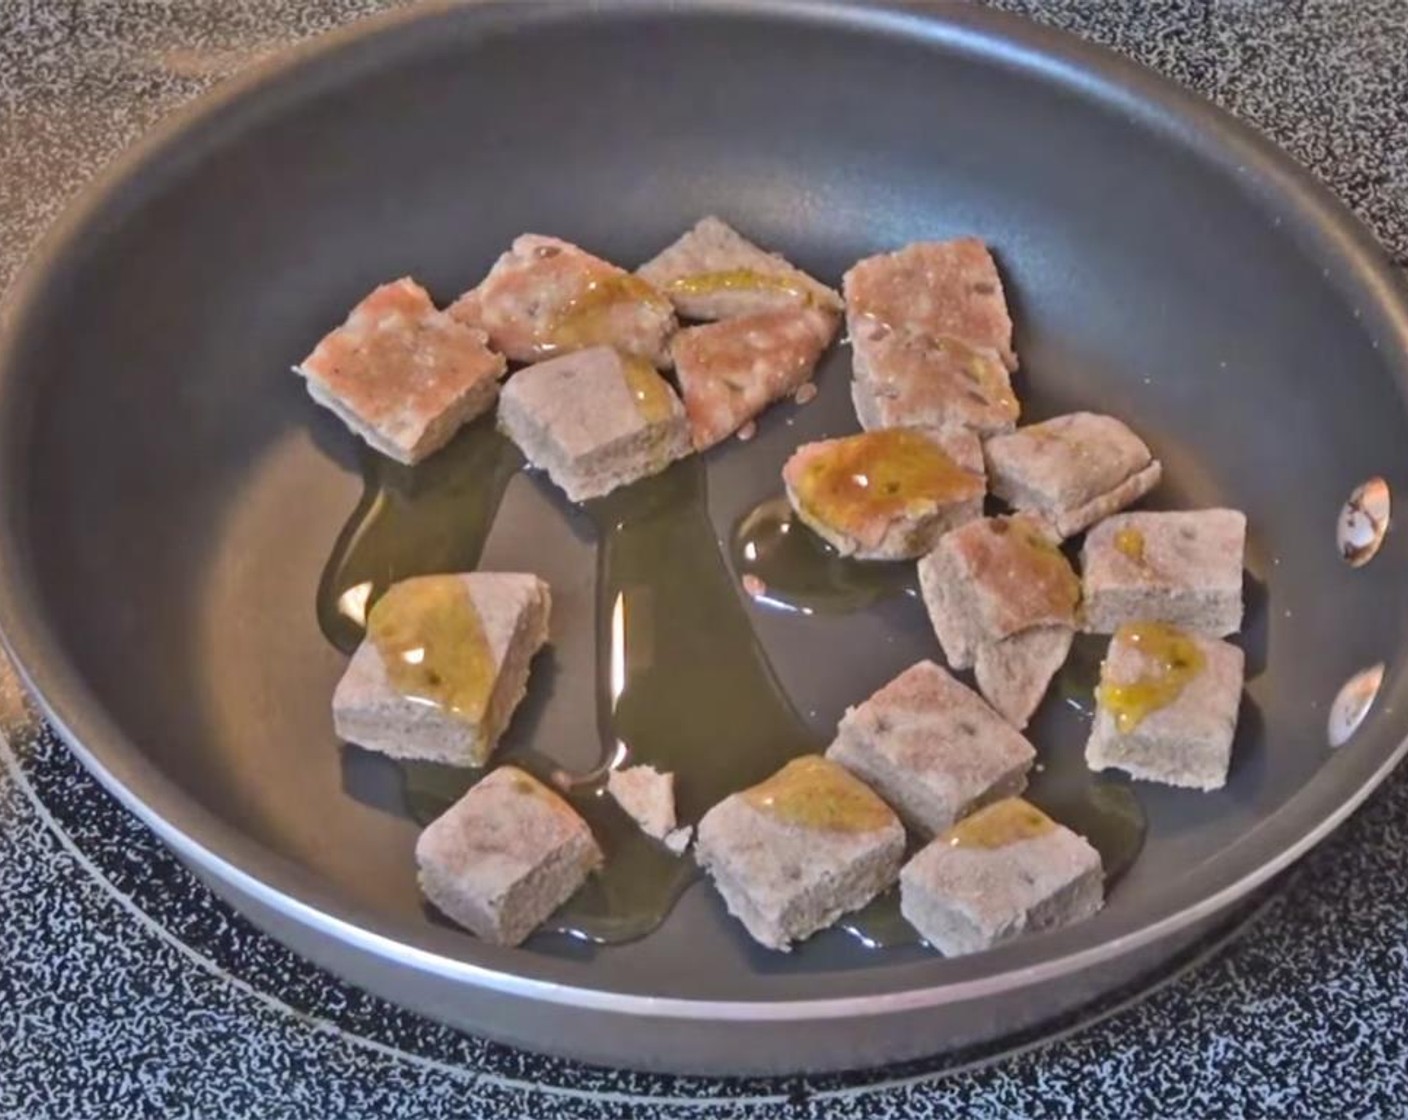 step 3 For croutons, place the Bread (to taste) in a skillet, and drizzle with Olive Oil (as needed). Season with Salt (to taste) and Ground Black Pepper (to taste), and mix well. Cook over medium heat until crisp, shaking skillet often.